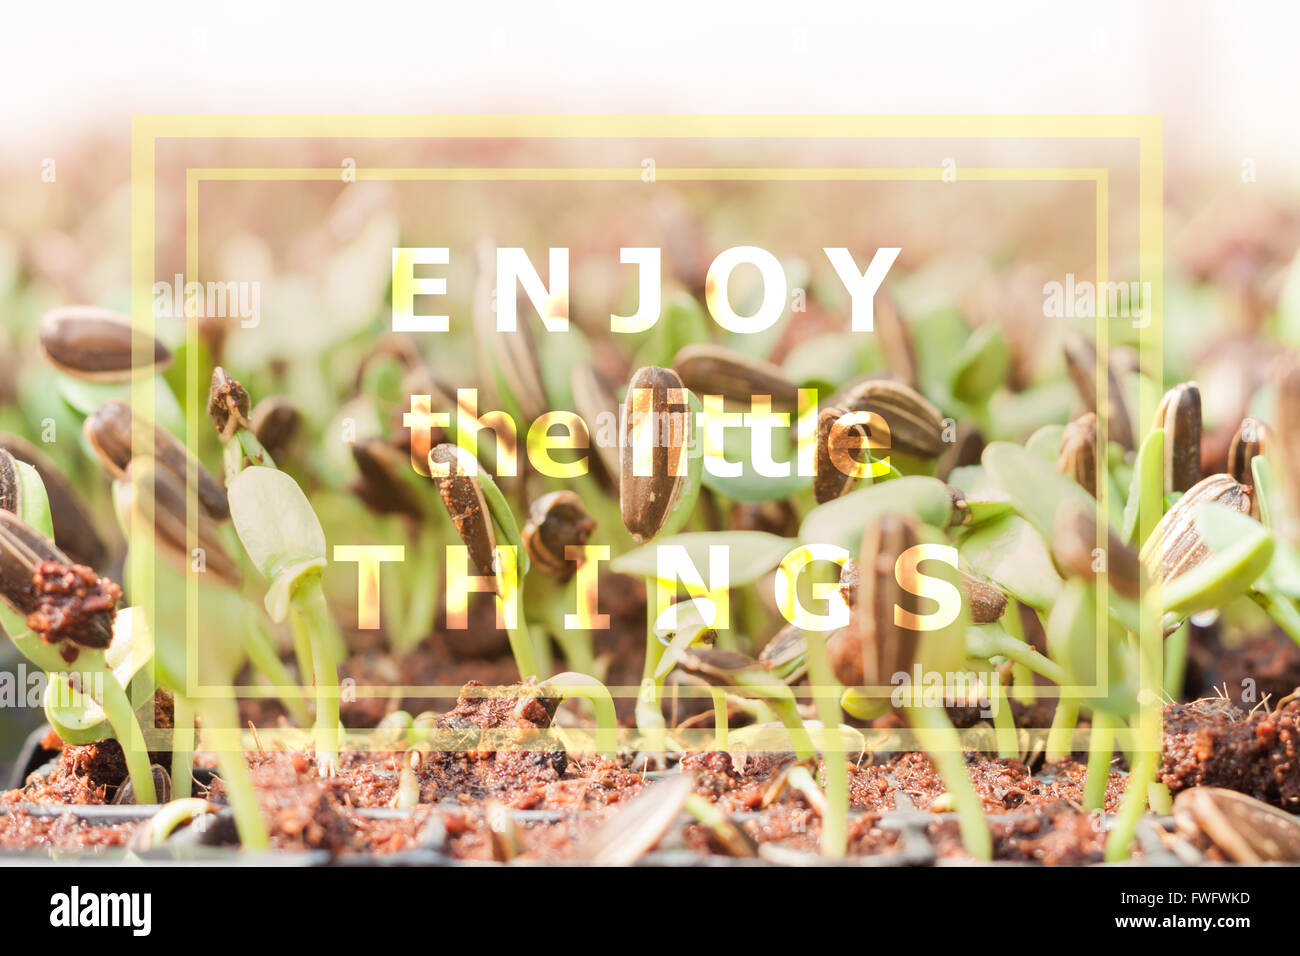 Enjoy the little things inspirational quote on nature background Stock Photo